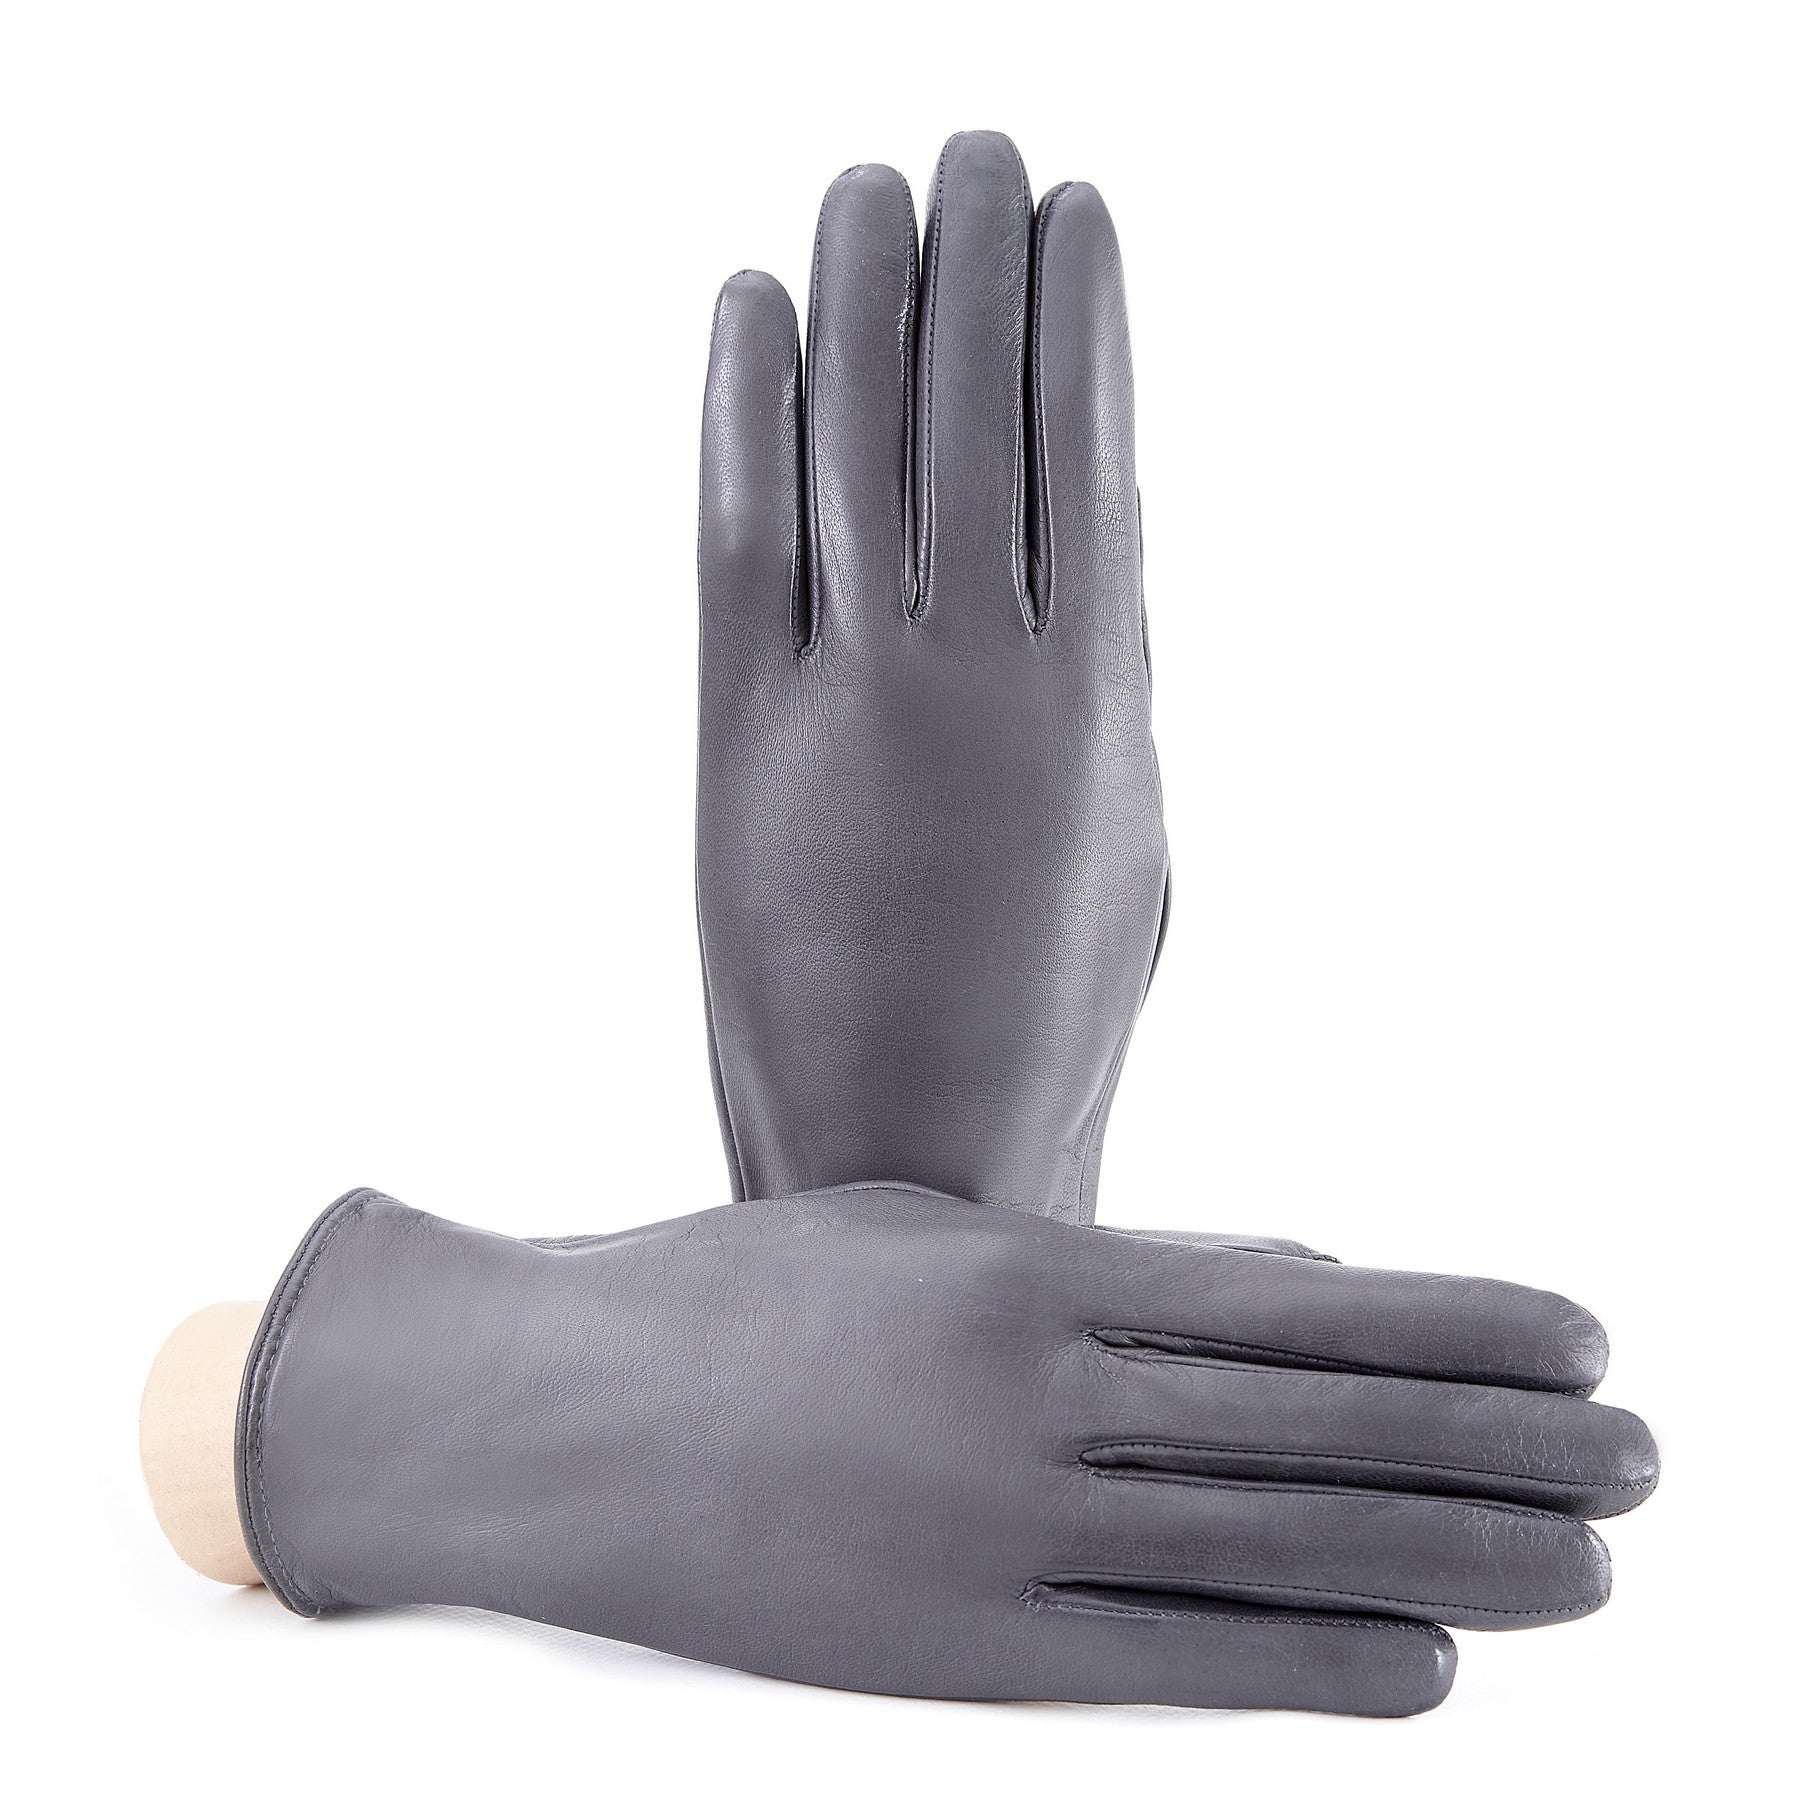 Women’s basic grey soft nappa leather gloves with palm opening and mix cashmere lining